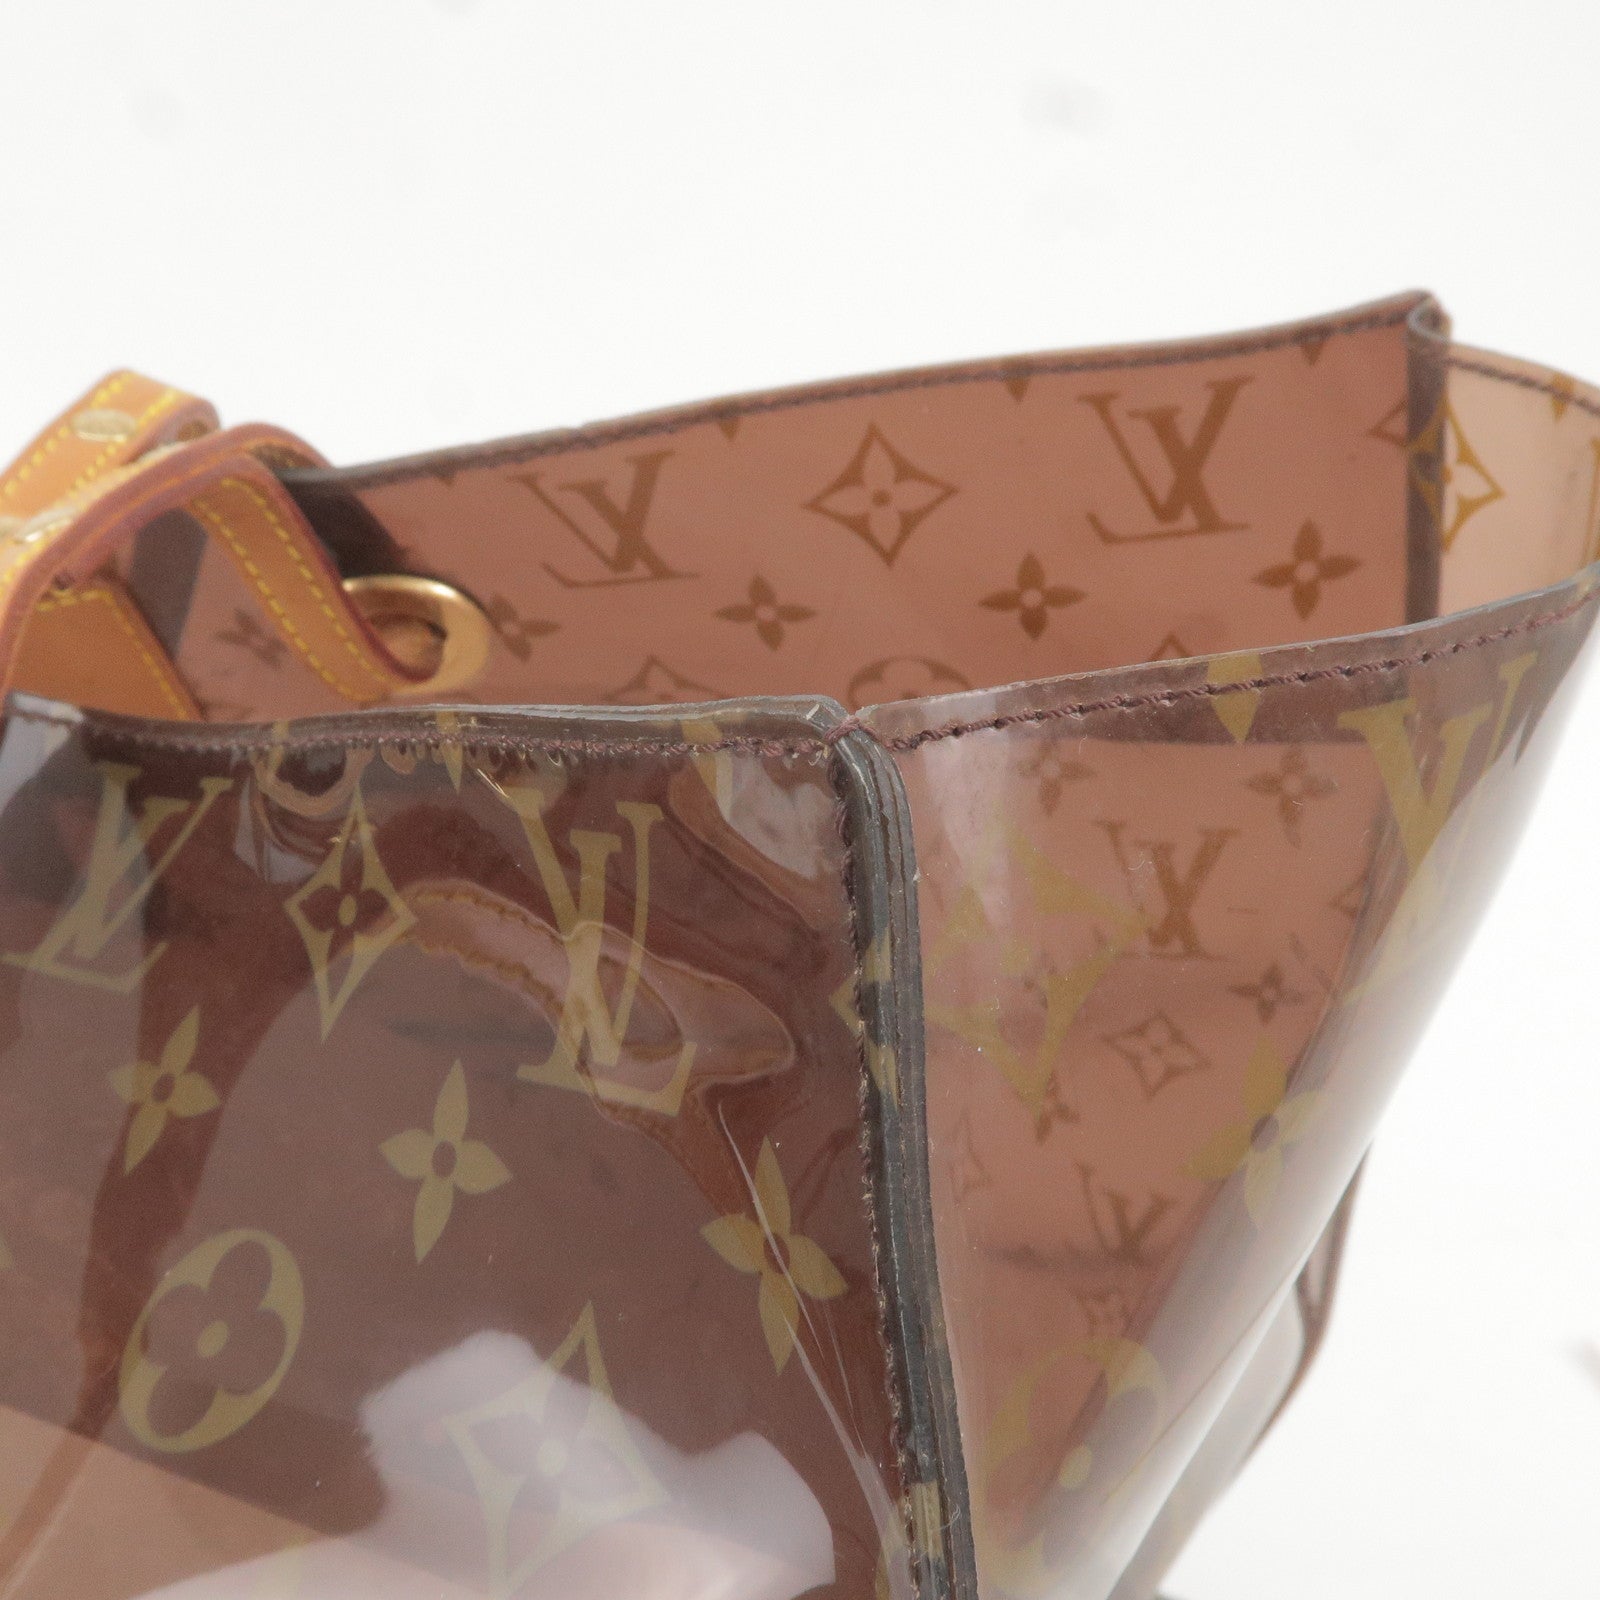 LOUIS VUITTON, a plastic and leather monogrammed bag, Cabas